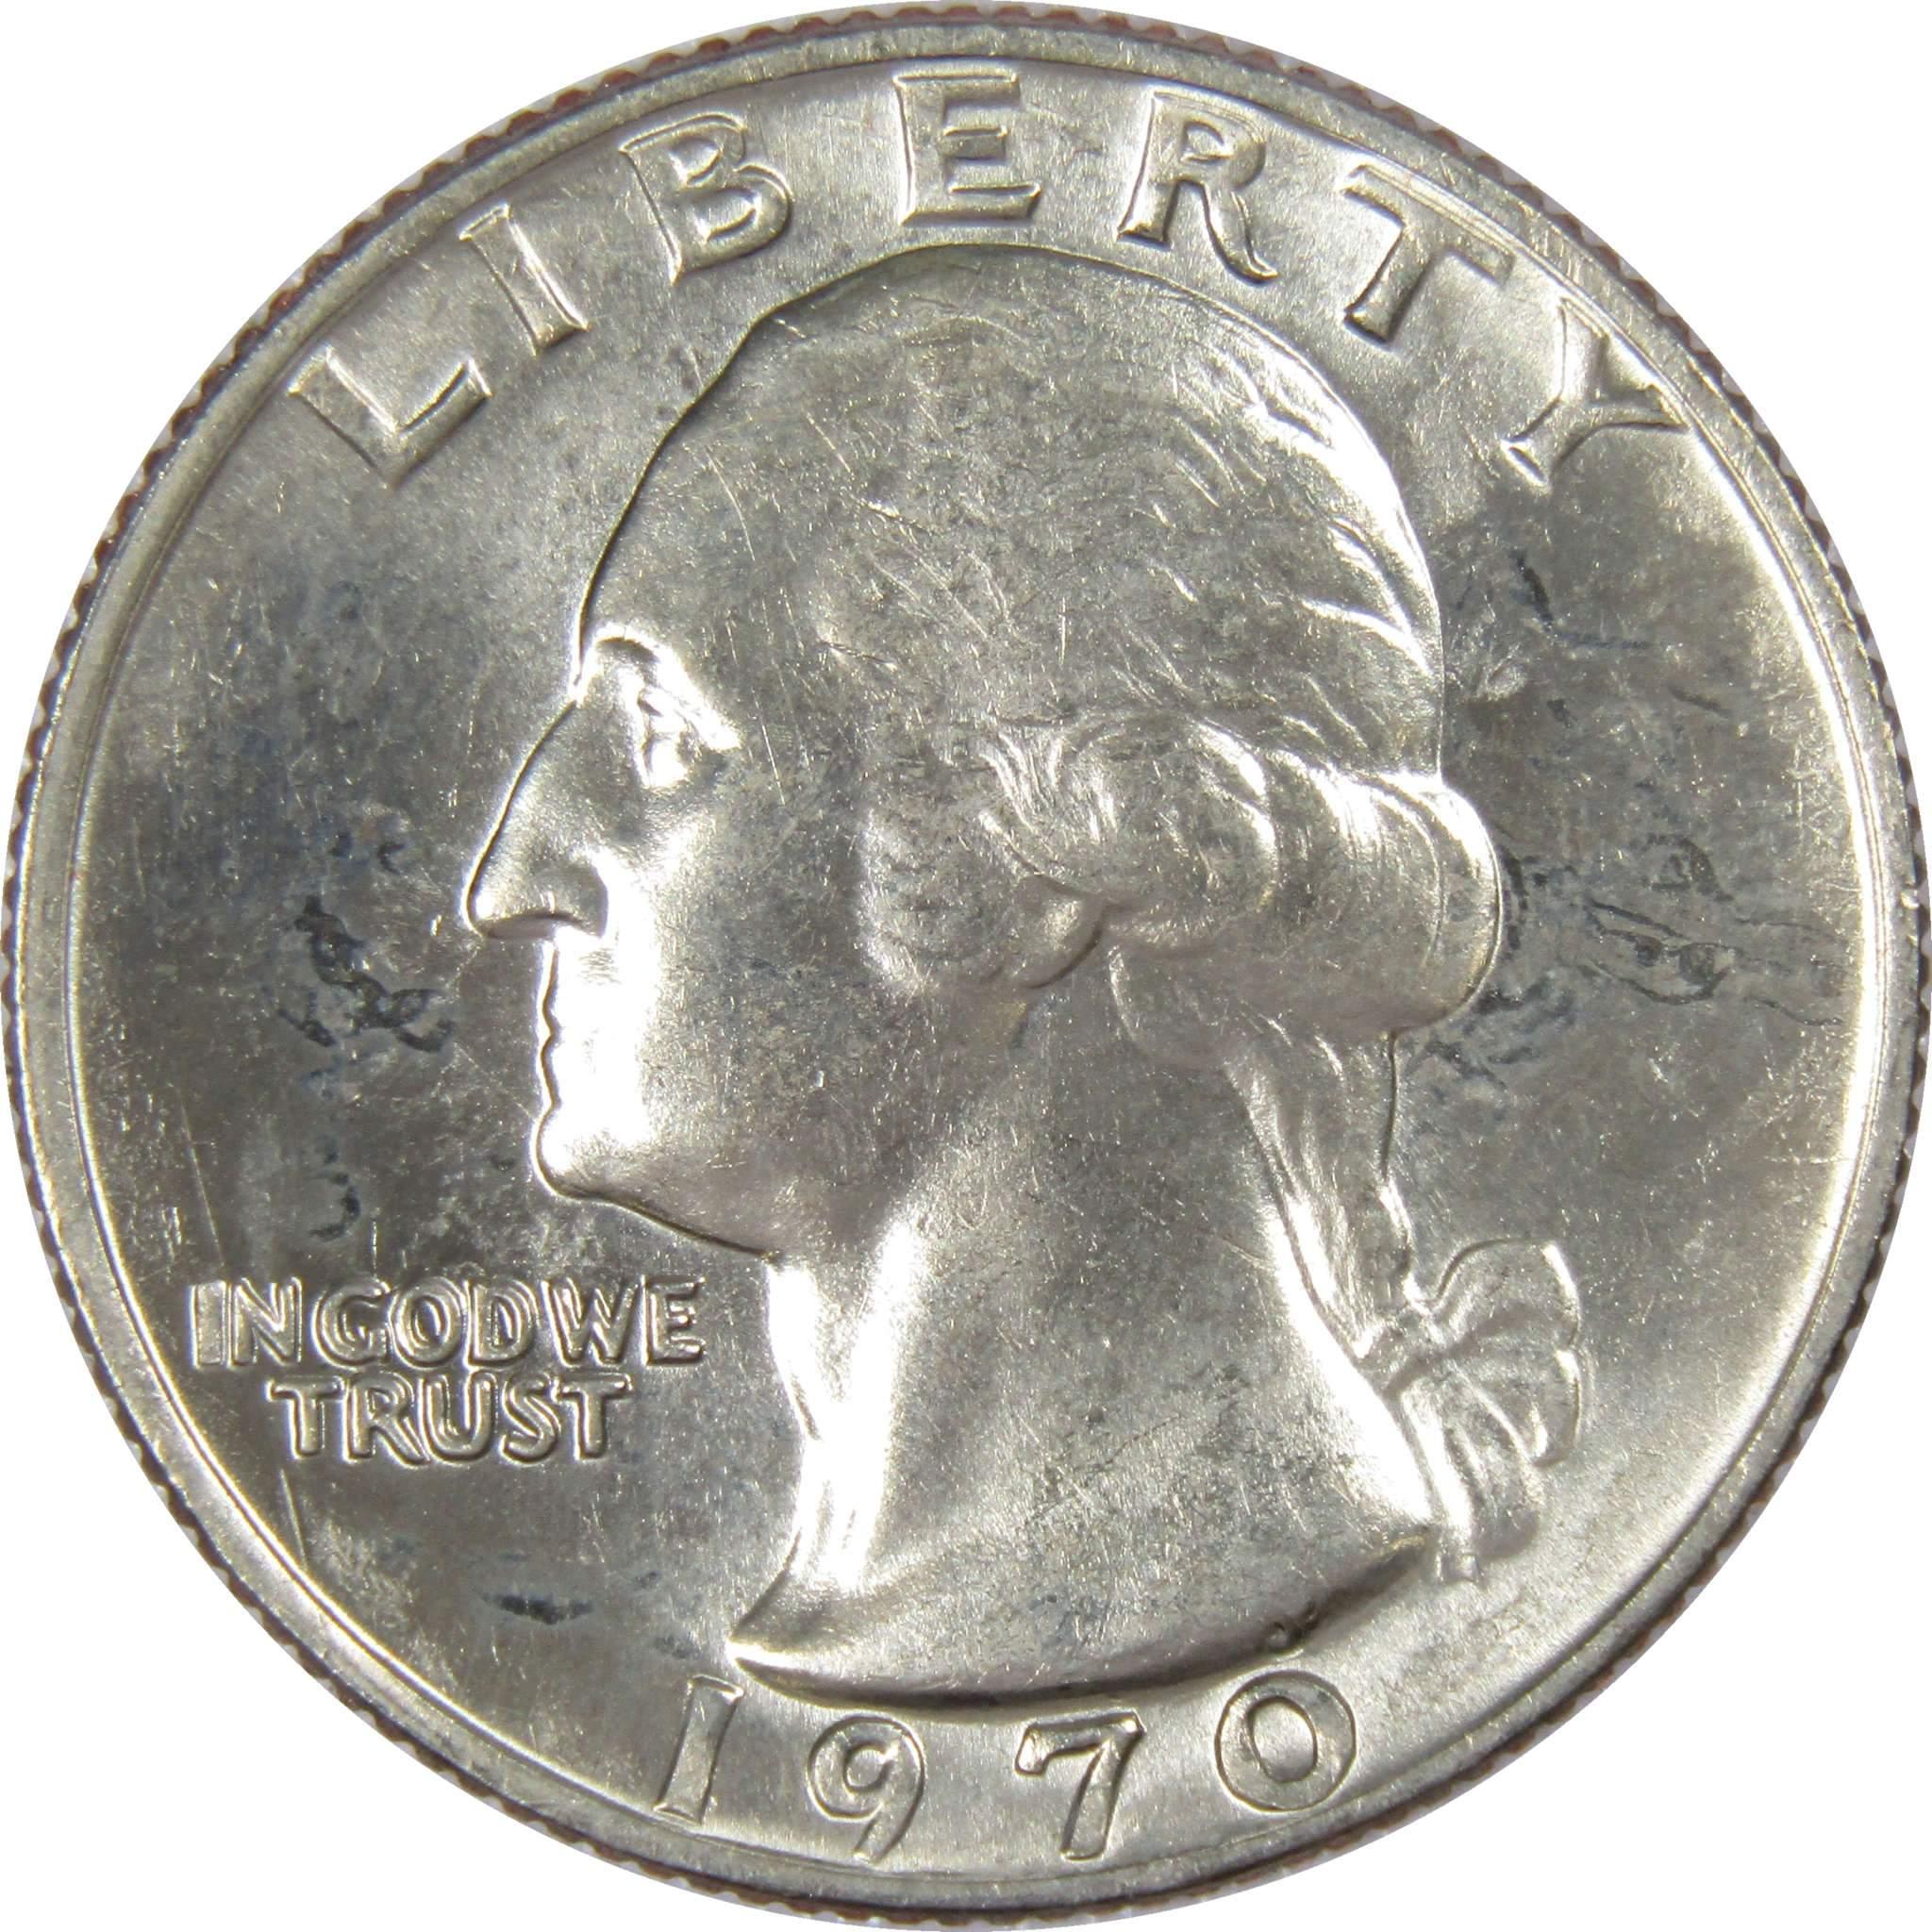 1970 Washington Quarter BU Uncirculated Mint State 25c US Coin Collectible